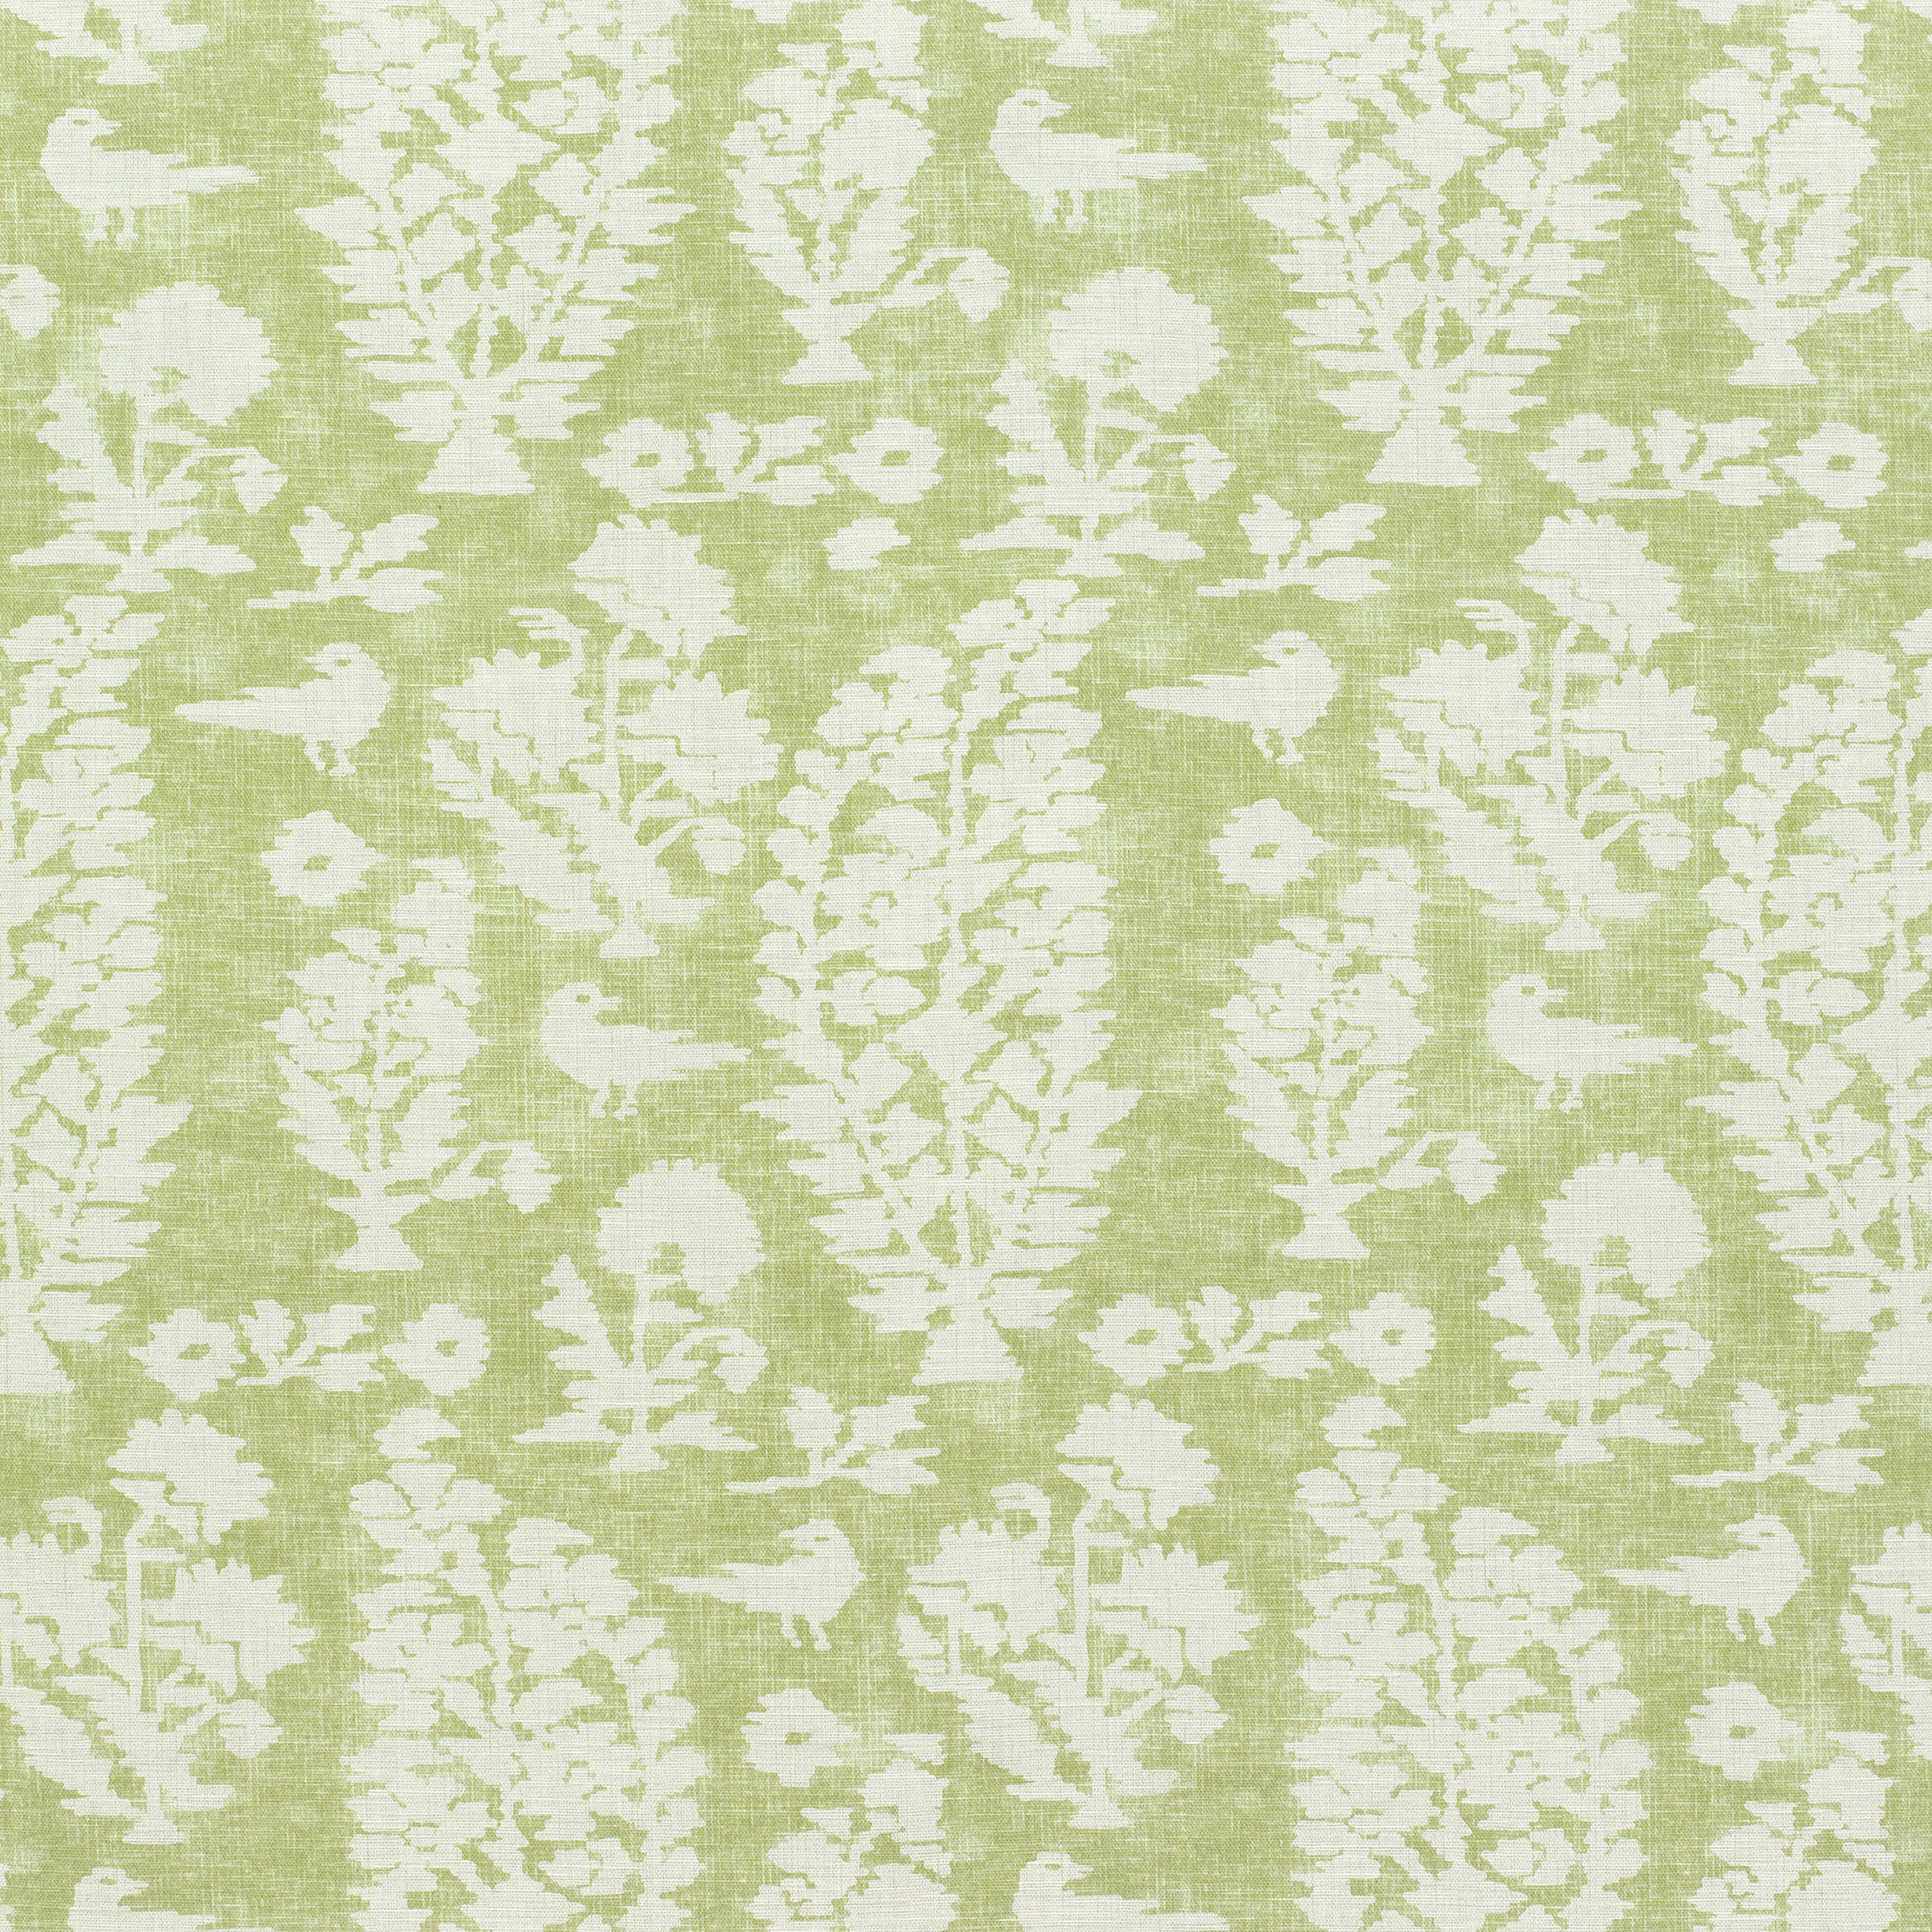 Allaire fabric in spring green color - pattern number F972597 - by Thibaut in the Chestnut Hill collection